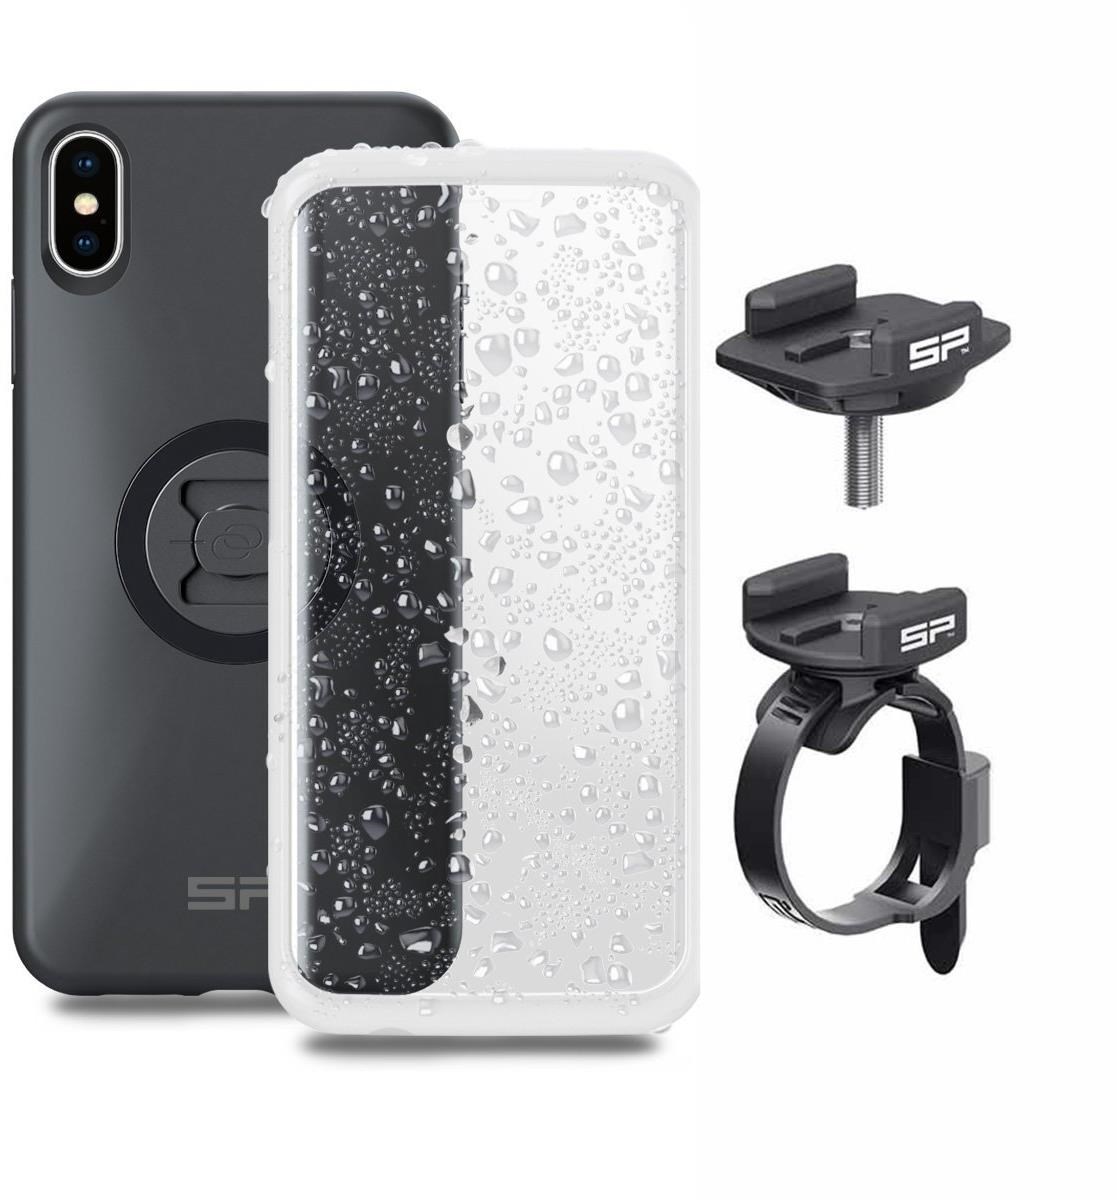 SP Connect Cycling Phone Mount Bundle - iPhone product image